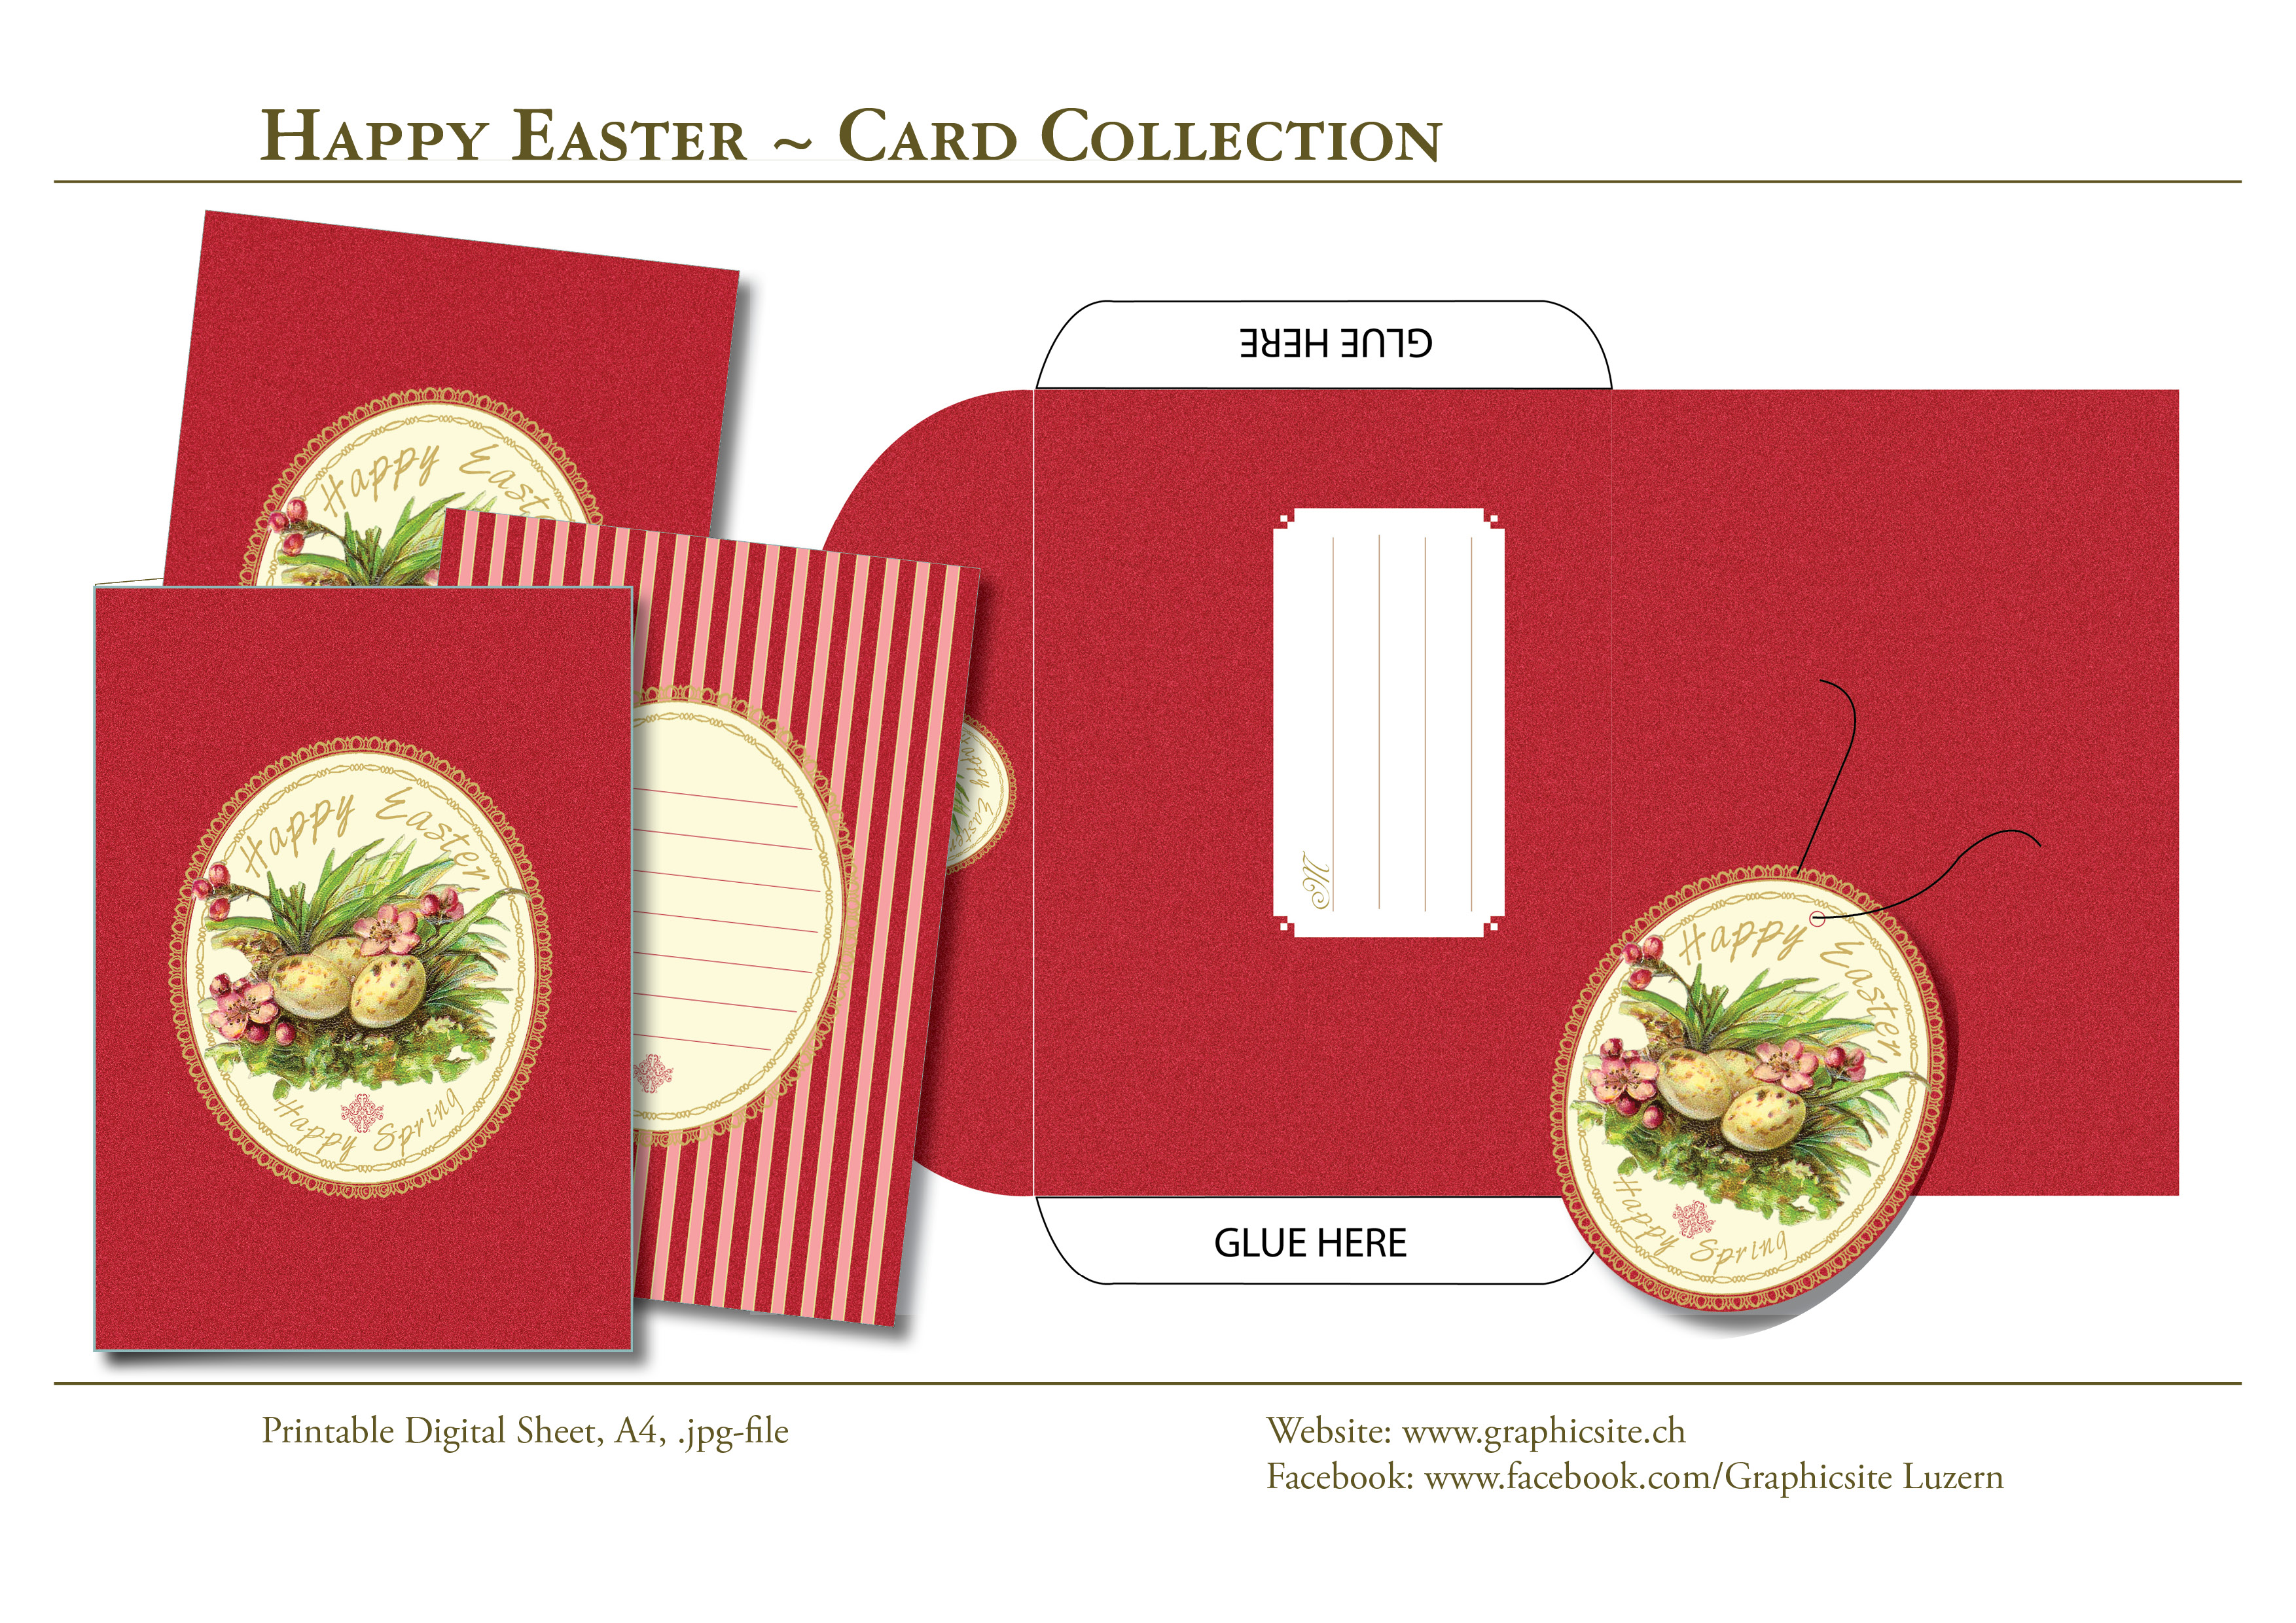 Printable Digital Sheets - Card Collection - DIY Printing, Easter2, download, online, shopping, Graphic Design, Luzern,